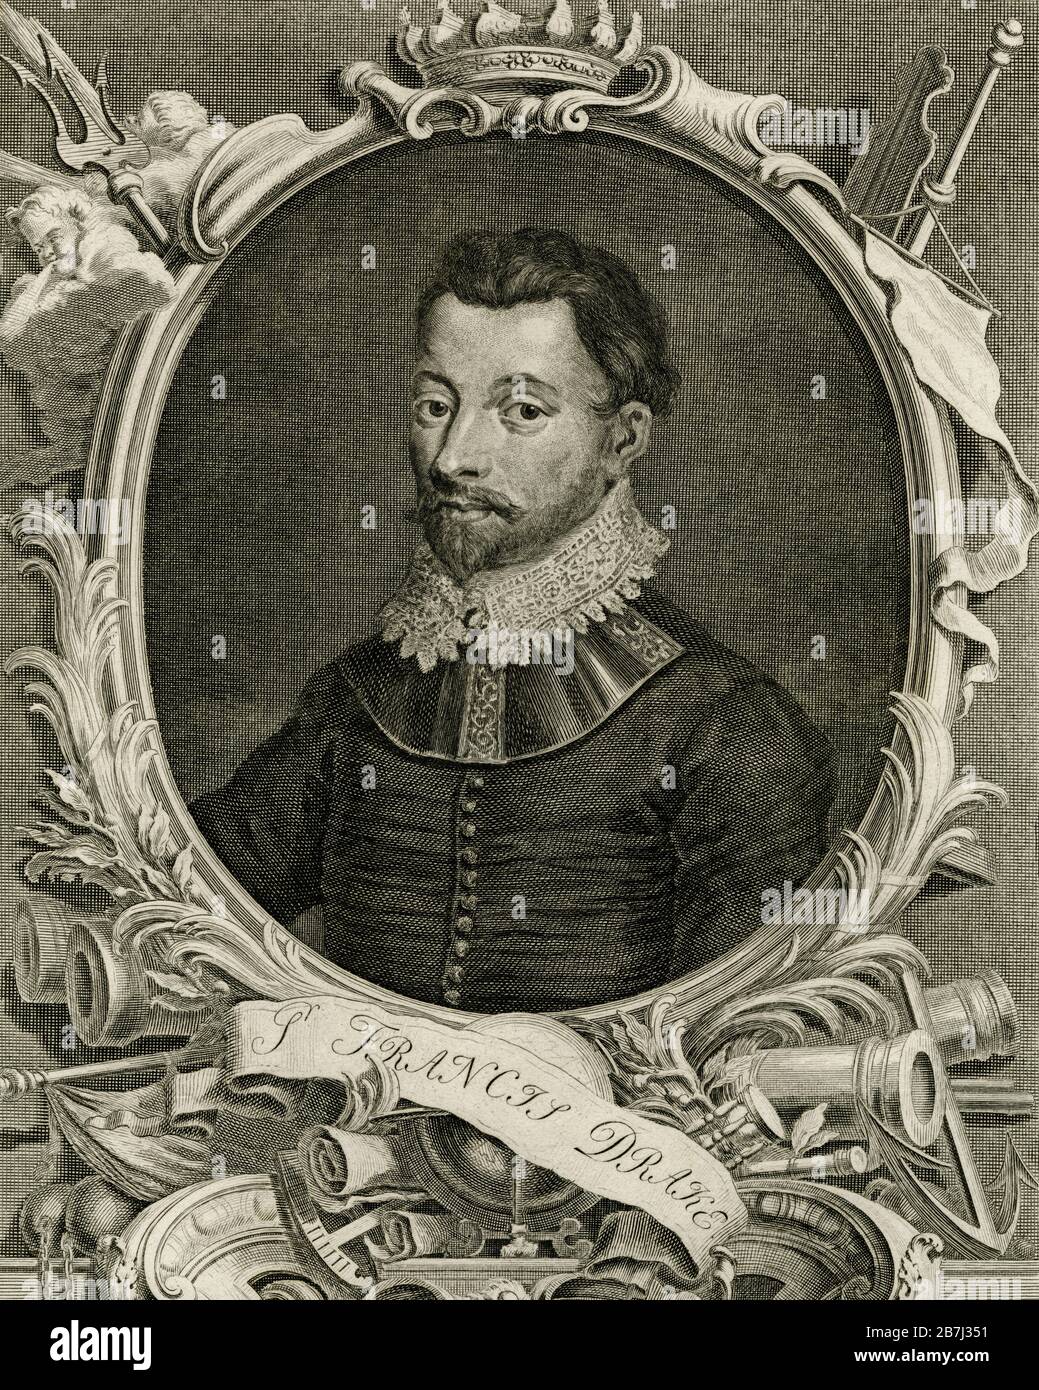 Sir Francis Drake (1540-1596), sea captain and circumnavigator of the world.  Detail of copperplate engraving, published in about 1746, by Dutch engraver, Jacobus Houbraken (1798 - 1780).  In 1588, as Vice-Admiral of the English fleet, Drake defeated the Spanish Armada and thwarted an attempted invasion of England by King Philip II of Spain.  This engraving includes details relating to Drake's life, including a sea battle in progress, a trident, a ship's mast, cannon, an anchor and, surmounting the portrait, a crown, decorated with the sterns of sailing ships. Stock Photo